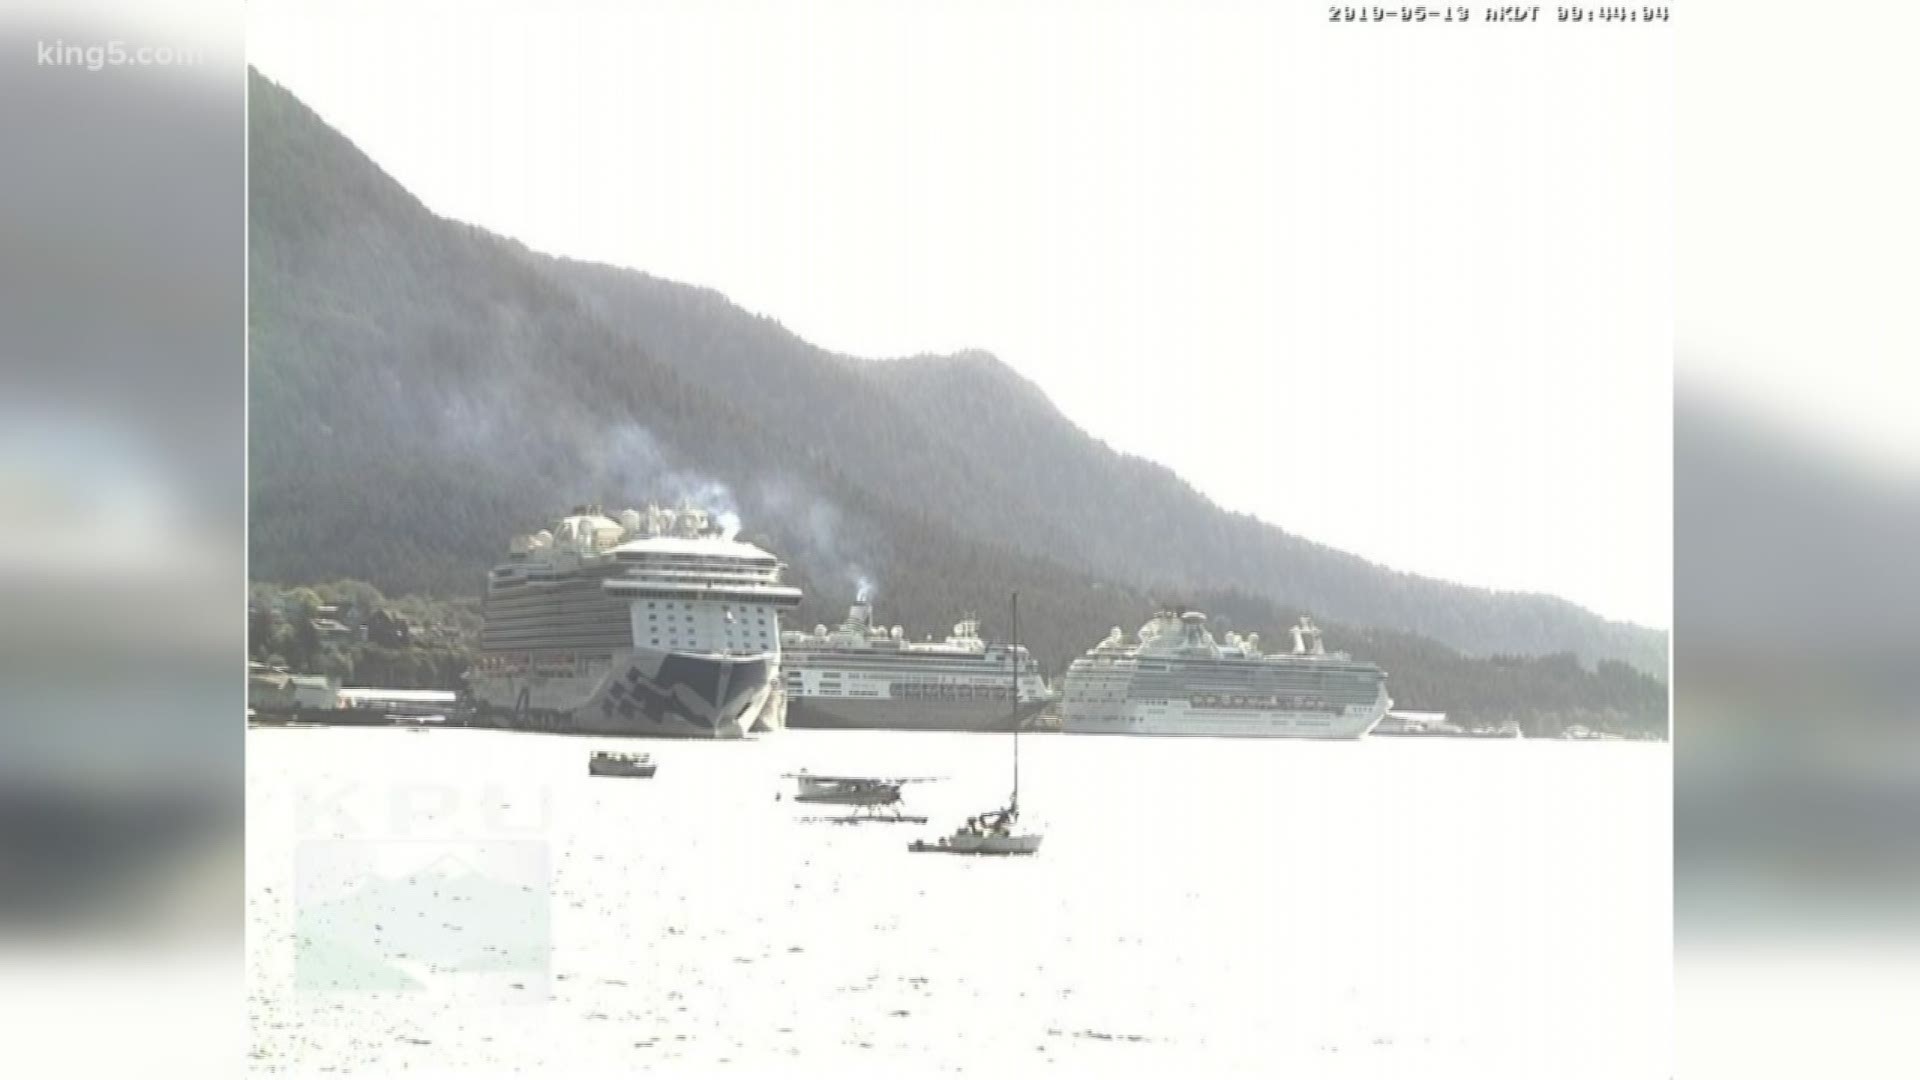 A cruise ship company said five people died in a mid-air plane crash over southeast Alaska. A team of federal investigators is expected to arrive in Alaska on Tuesday to determine the cause of the crash.